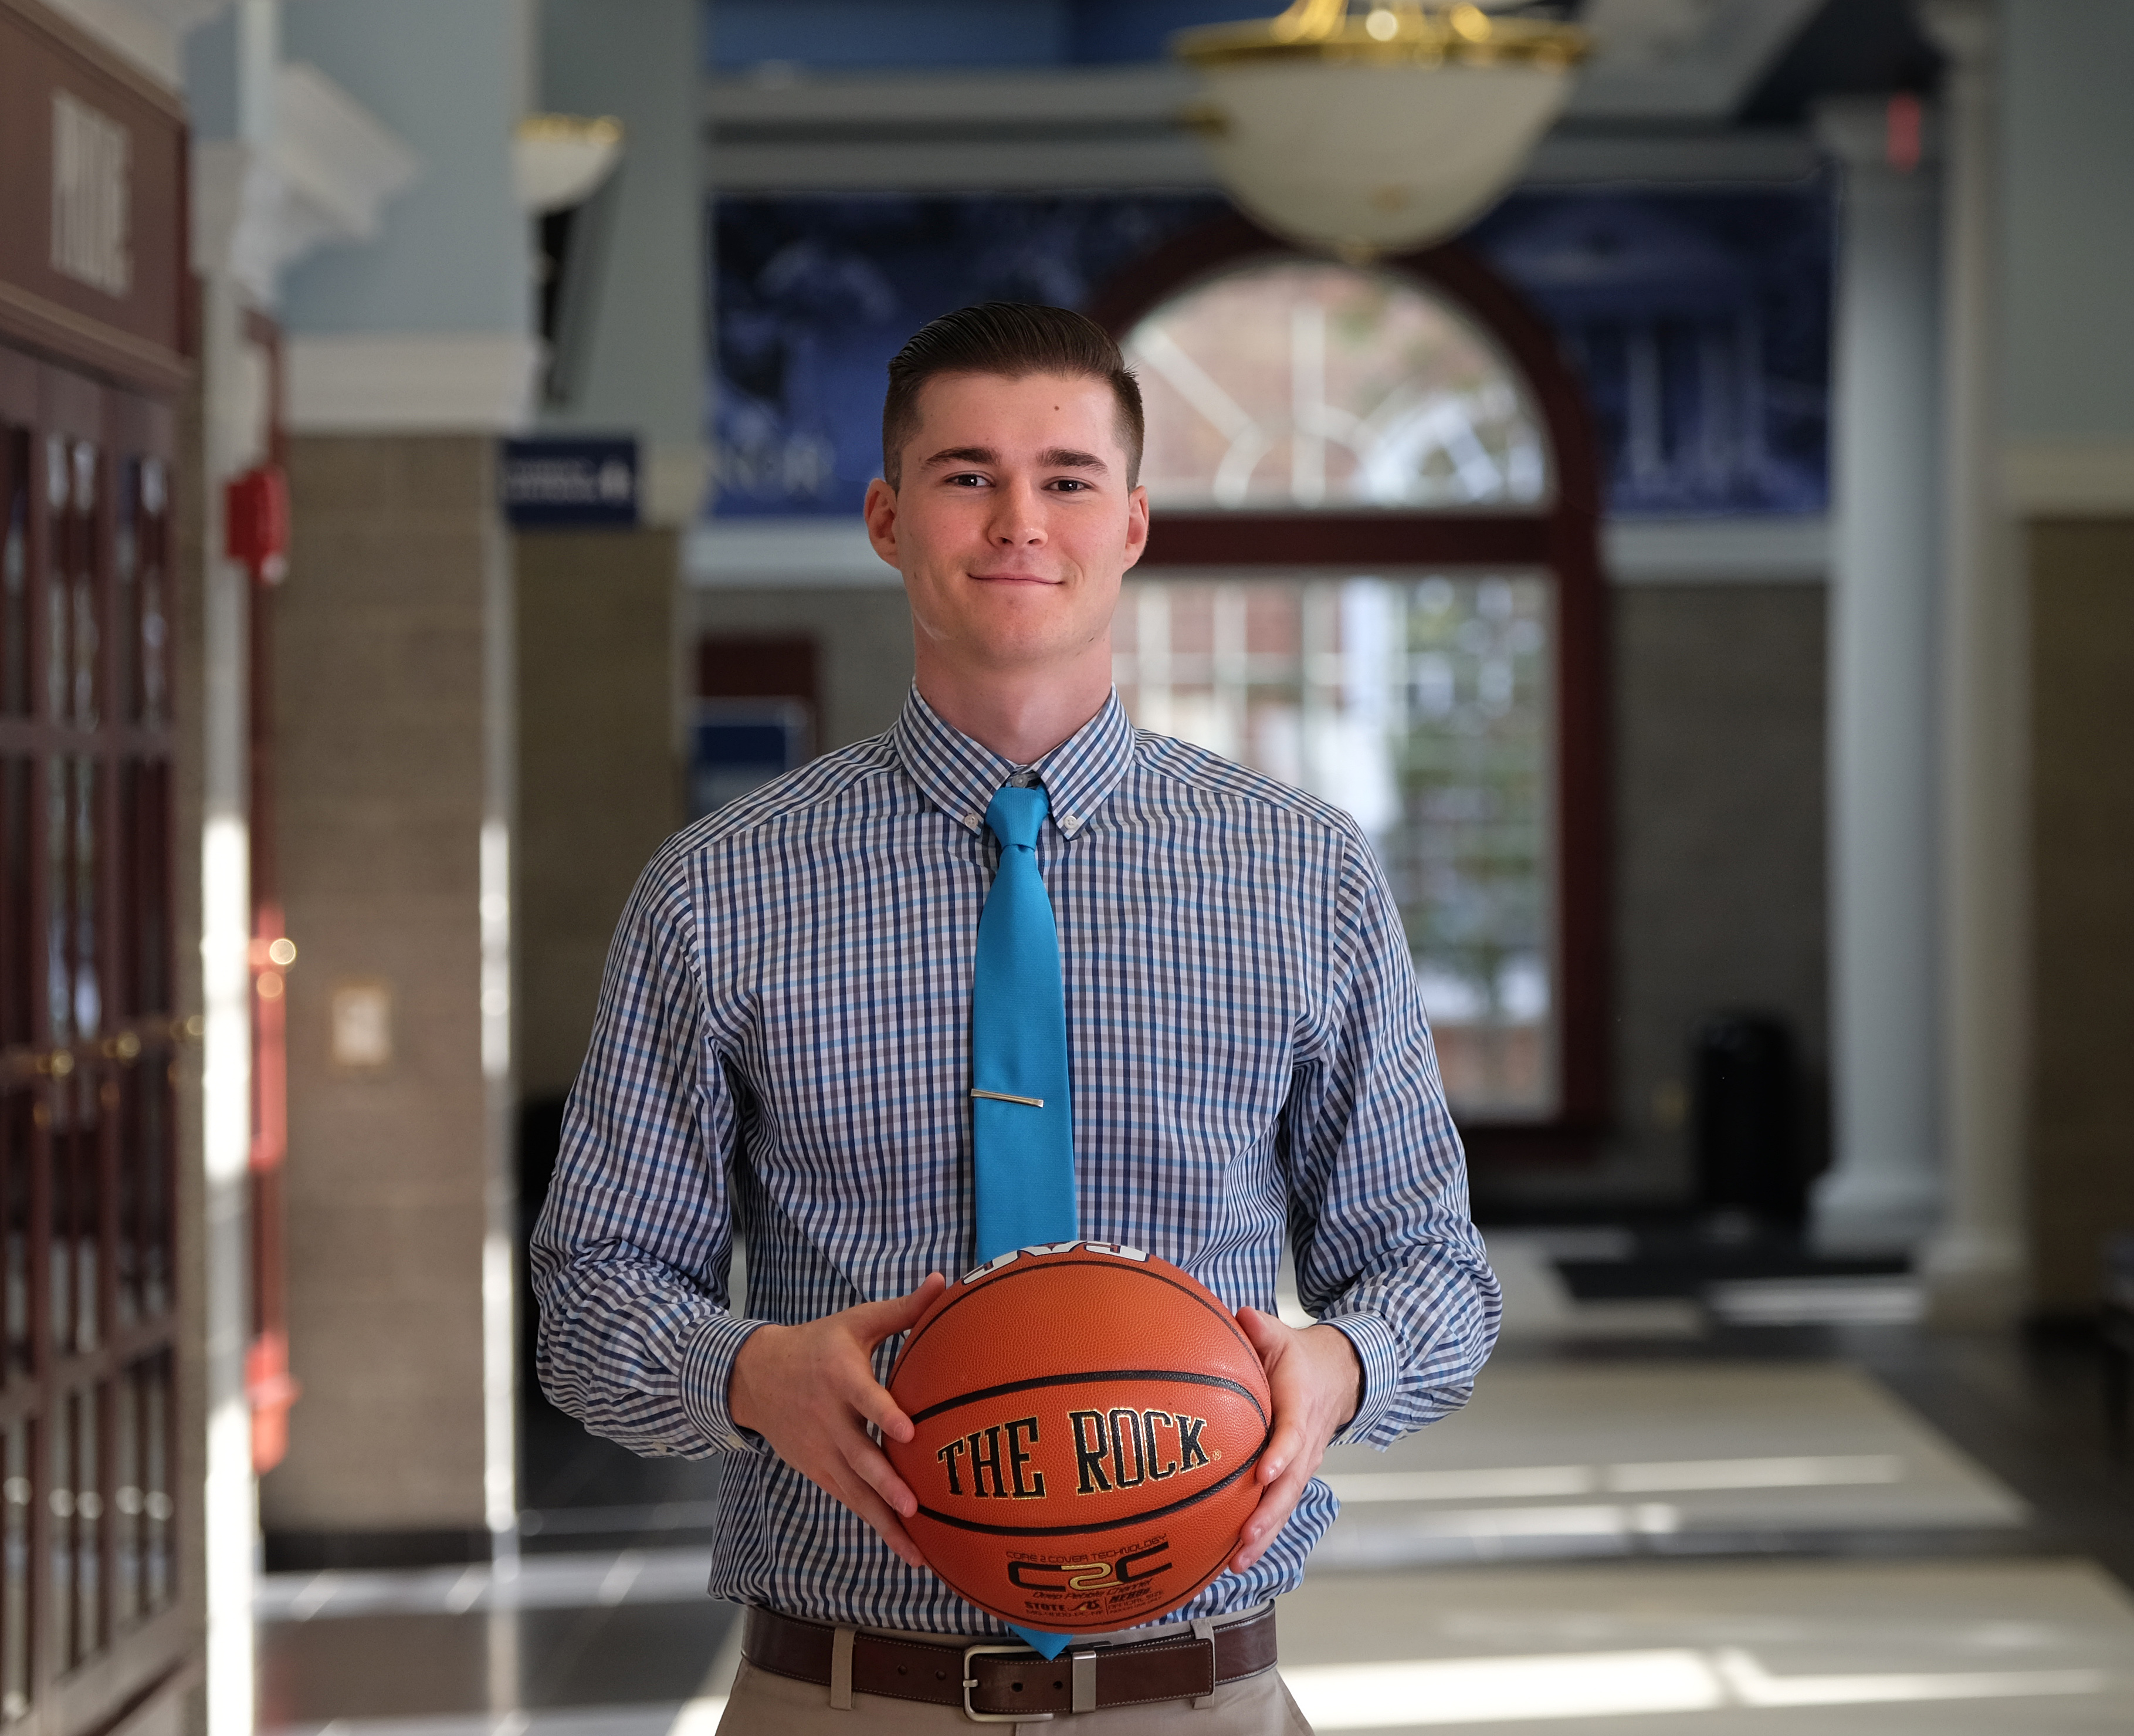 Graduate Pathway Programs student poses with a basketball